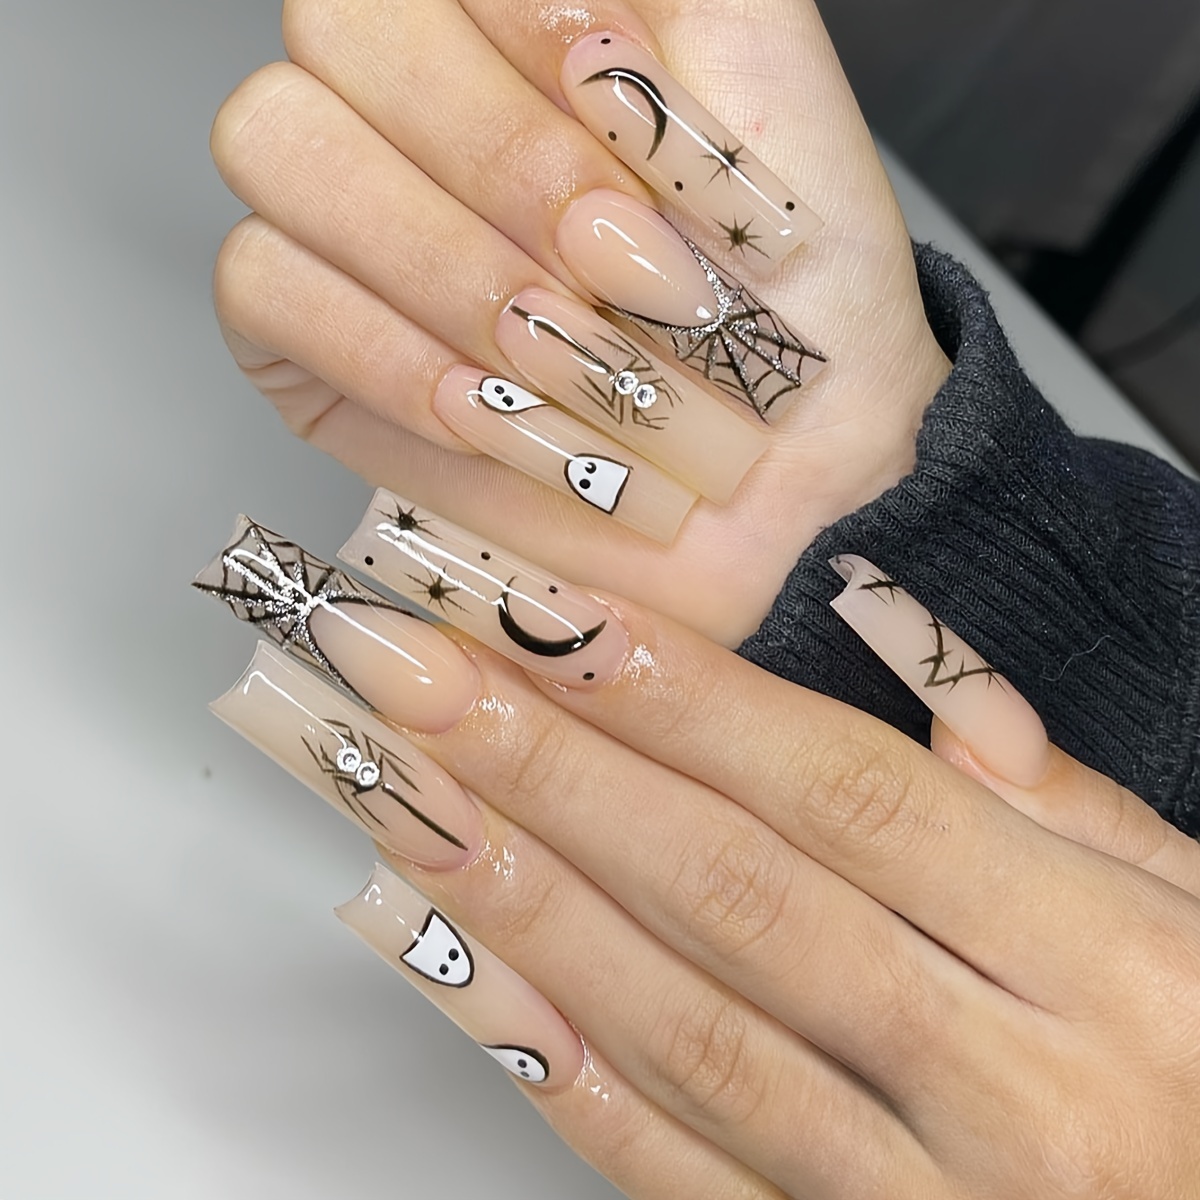 24pcs Long Coffin Shaped Transparent Nail Art With Ins Style Cute, Elegant,  Christmas Design With Golden Glitter, Face & Snowflake Pattern Ideal For  Parties, Dance Or Daily Wear With Press On Nails